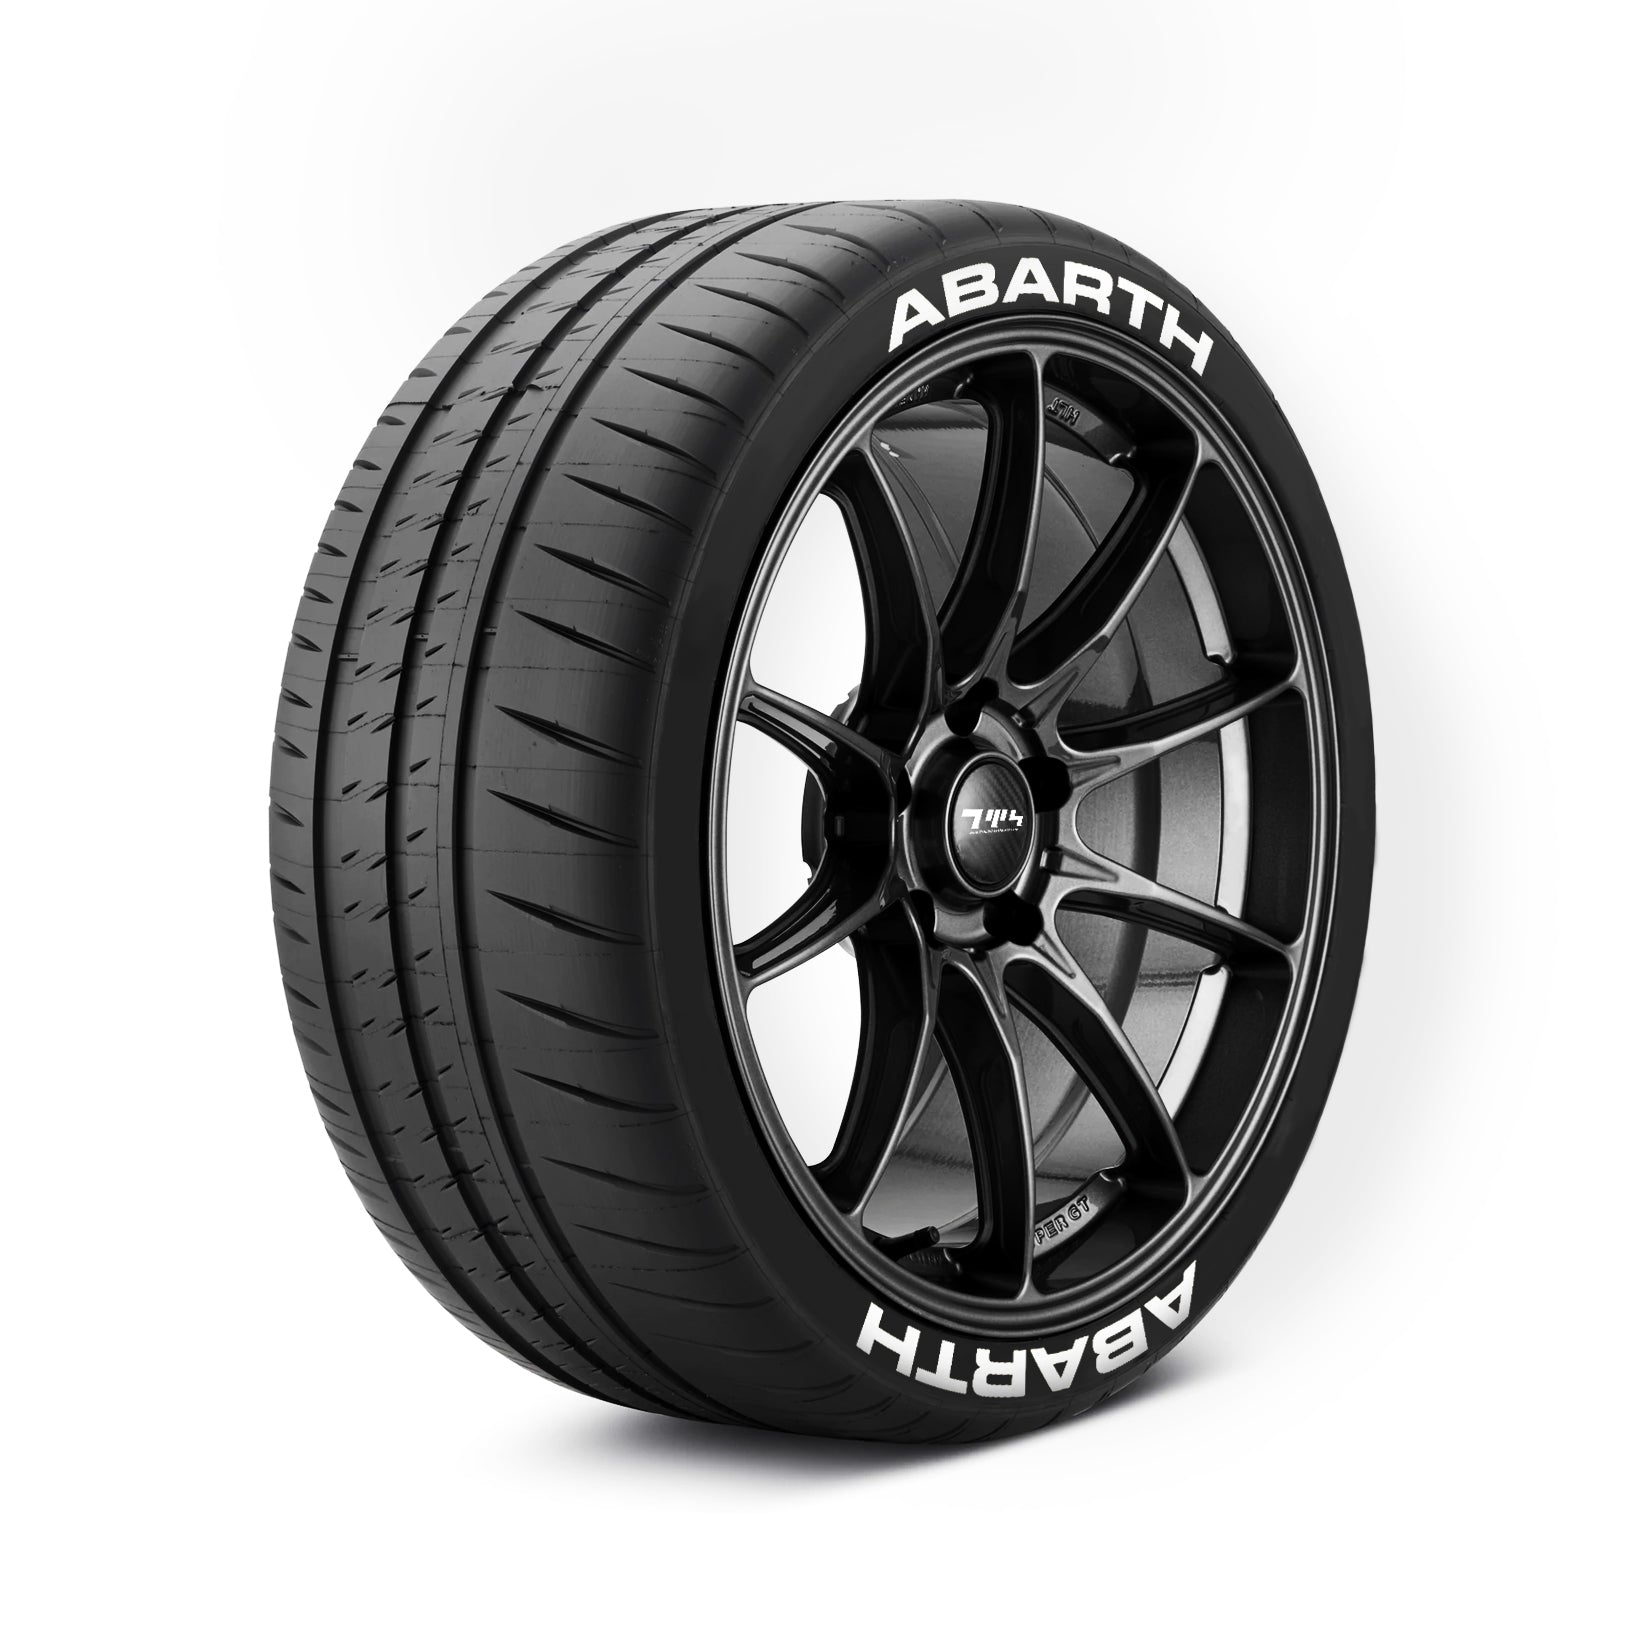 Abarth Tyre Stickers Kit